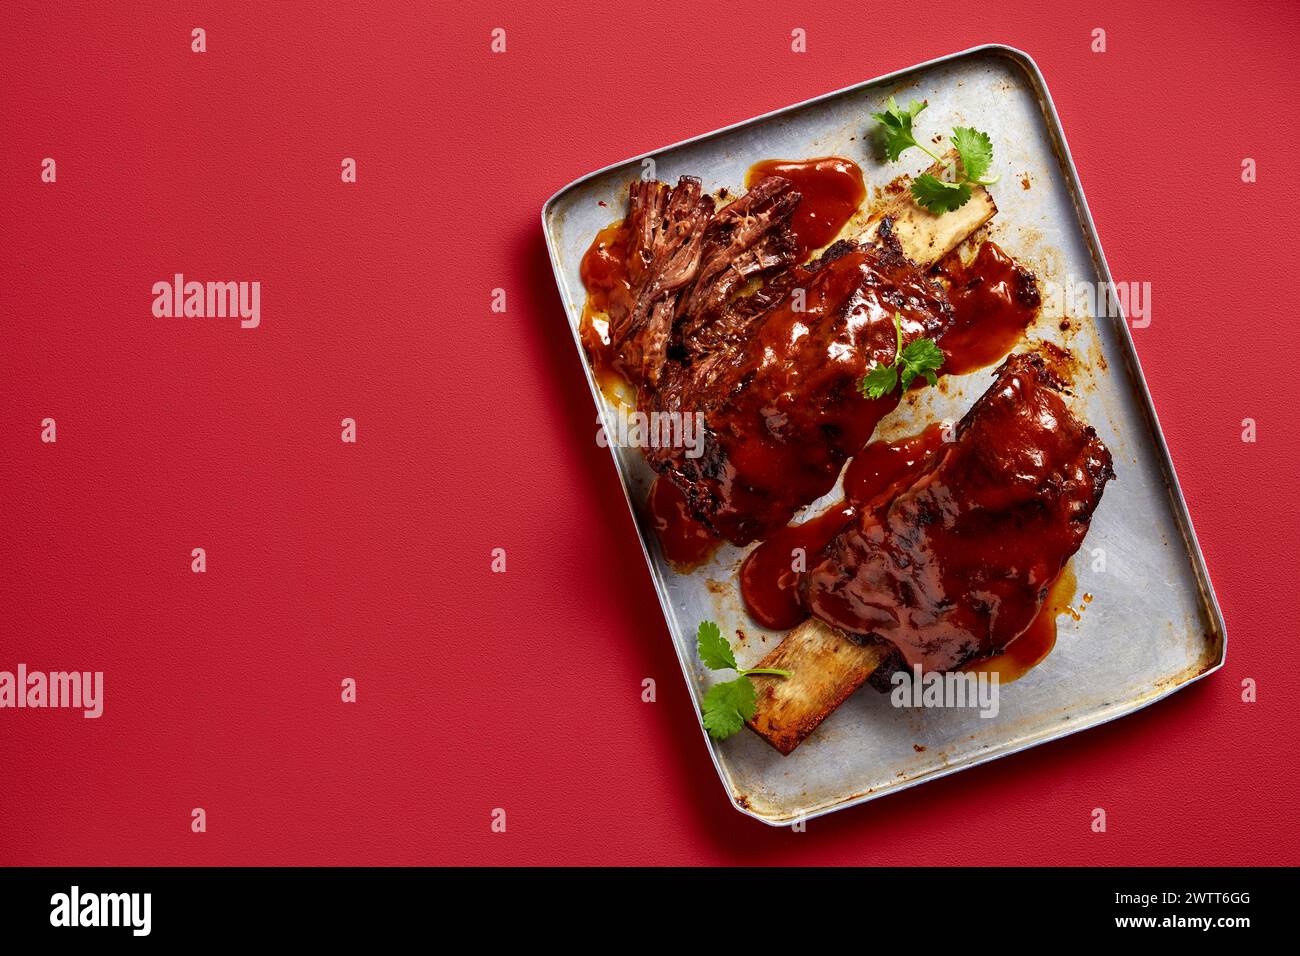 A delicious serving of barbecue ribs on a plate, ready to be enjoyed. Stock Photo